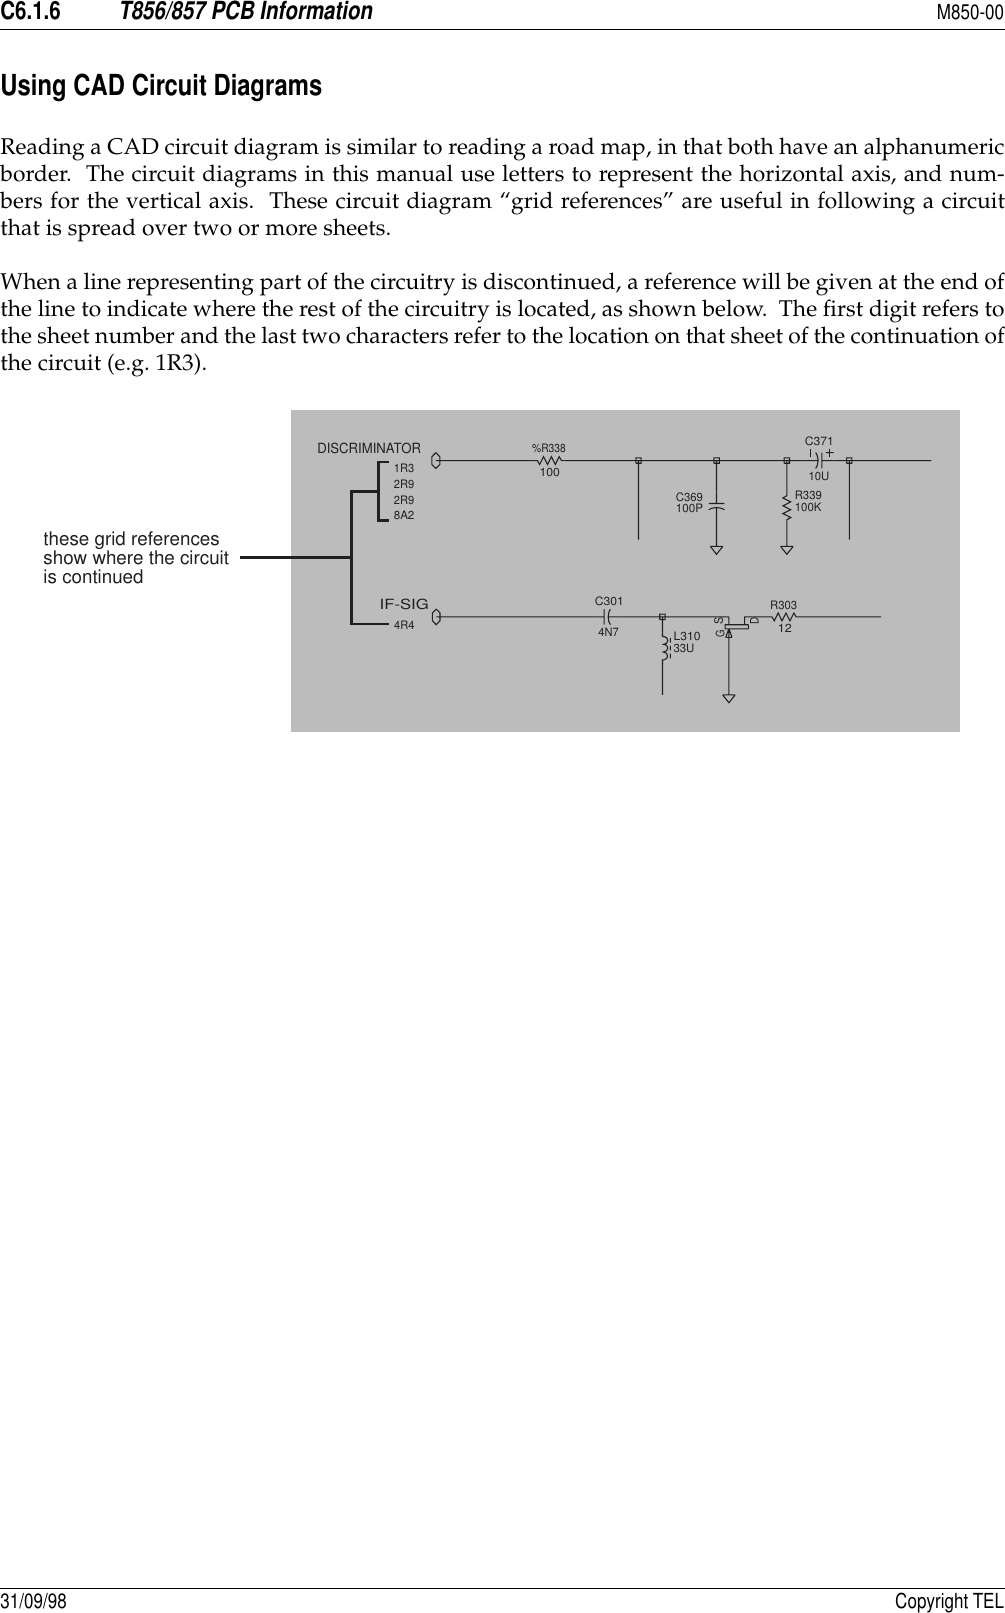 C6.1.6T856/857 PCB InformationM850-0031/09/98 Copyright TELUsing CAD Circuit DiagramsReading a CAD circuit diagram is similar to reading a road map, in that both have an alphanumericborder.  The circuit diagrams in this manual use letters to represent the horizontal axis, and num-bers for the vertical axis.  These circuit diagram “grid references” are useful in following a circuitthat is spread over two or more sheets.When a line representing part of the circuitry is discontinued, a reference will be given at the end ofthe line to indicate where the rest of the circuitry is located, as shown below.  The first digit refers tothe sheet number and the last two characters refer to the location on that sheet of the continuation ofthe circuit (e.g. 1R3).C3014N7R30312DSGL31033UIF-SIG4R4C369100PC37110UR339100K%R338100DISCRIMINATOR1R32R92R98A2these grid referencesshow where the circuitis continued